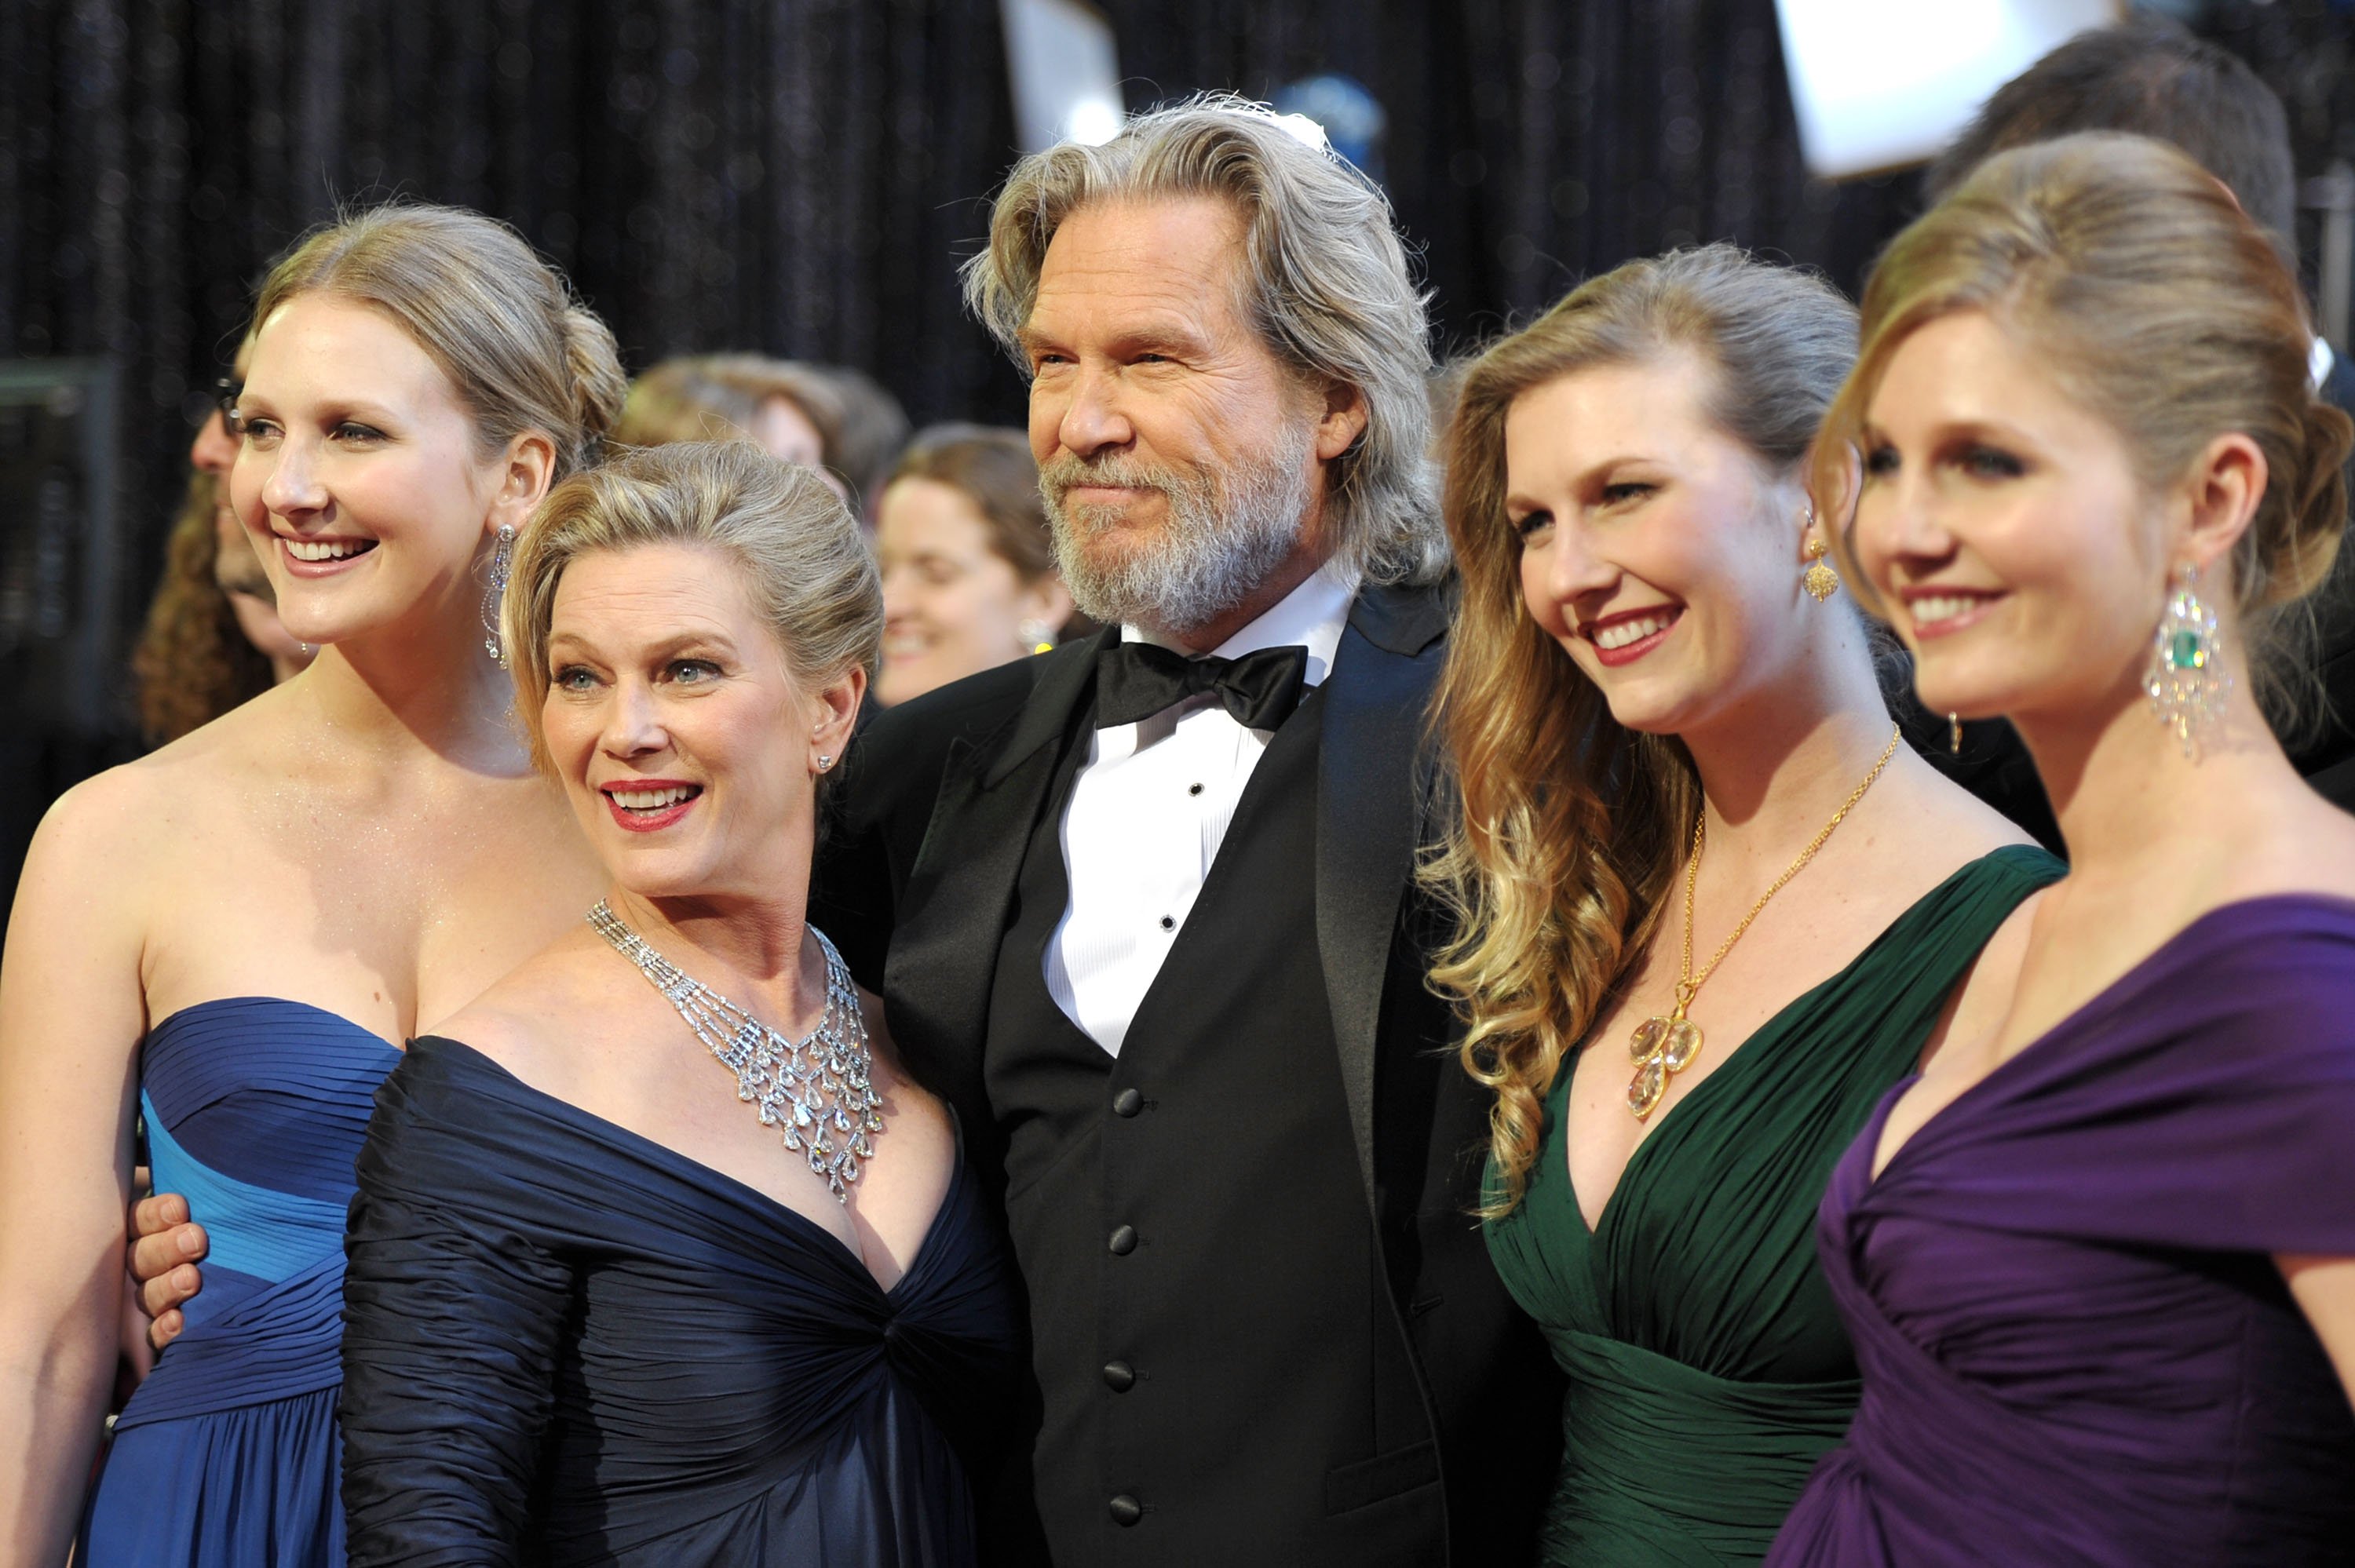 Actor Jeff Bridges, wife Susan Bridges, and their daughters arrive at the 83rd Annual Academy Awards held at the Kodak Theatre on February 27, 2011 in Hollywood, | Source: Getty Images